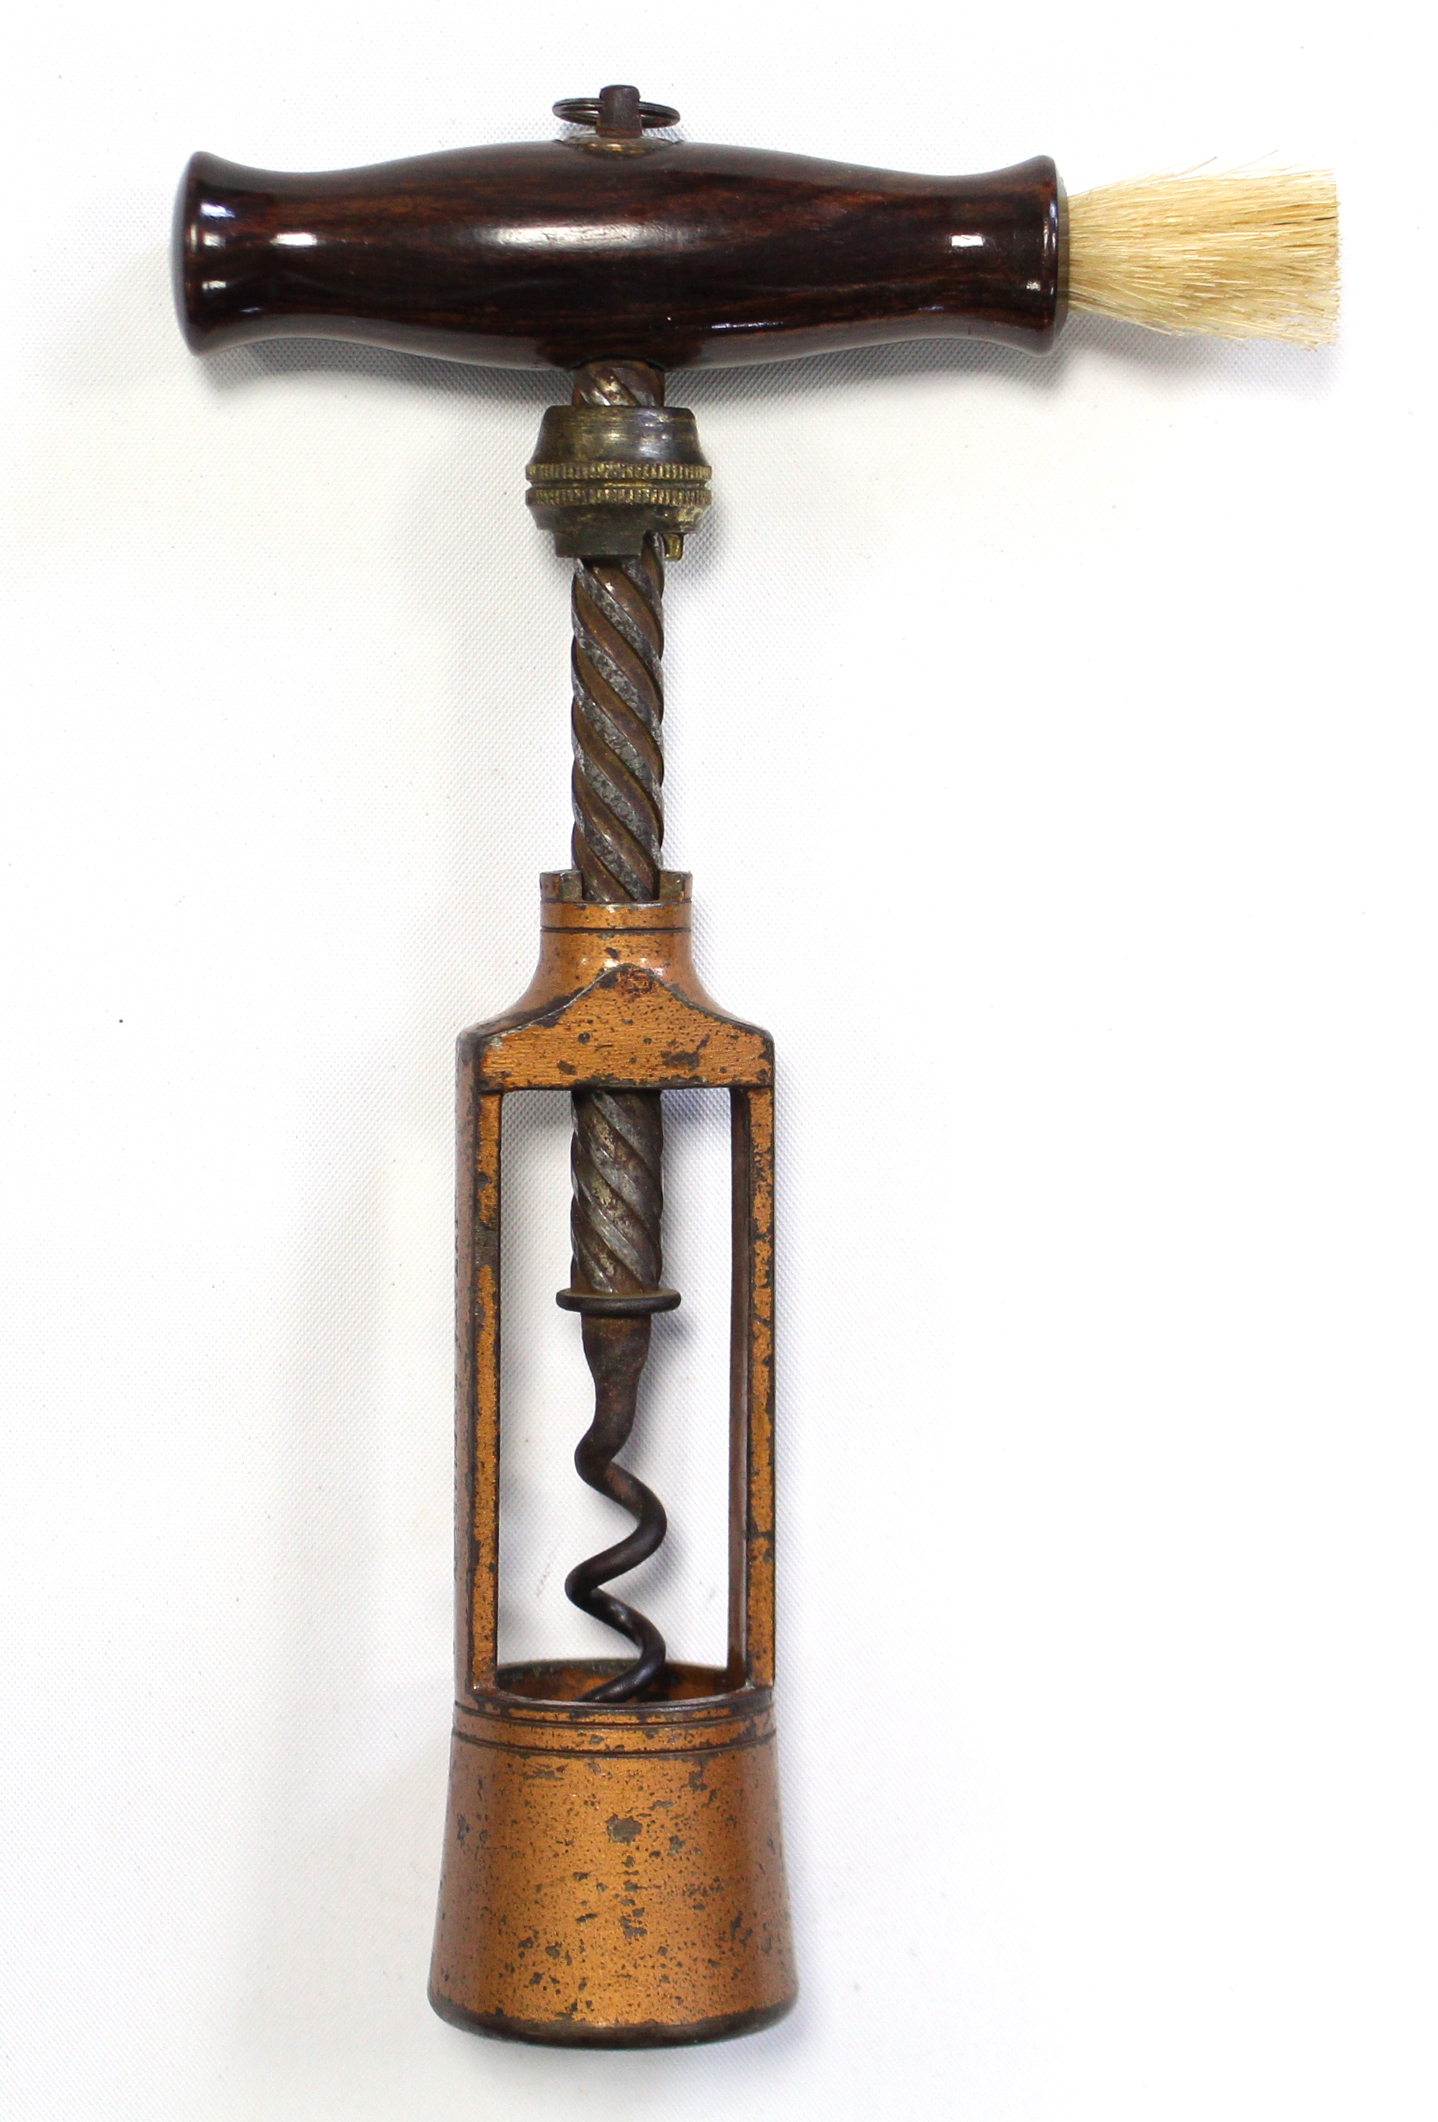 A 19th century Twiggs Patent open-barrel corkscrew with turned treen handle, 7½” long. - Image 2 of 4